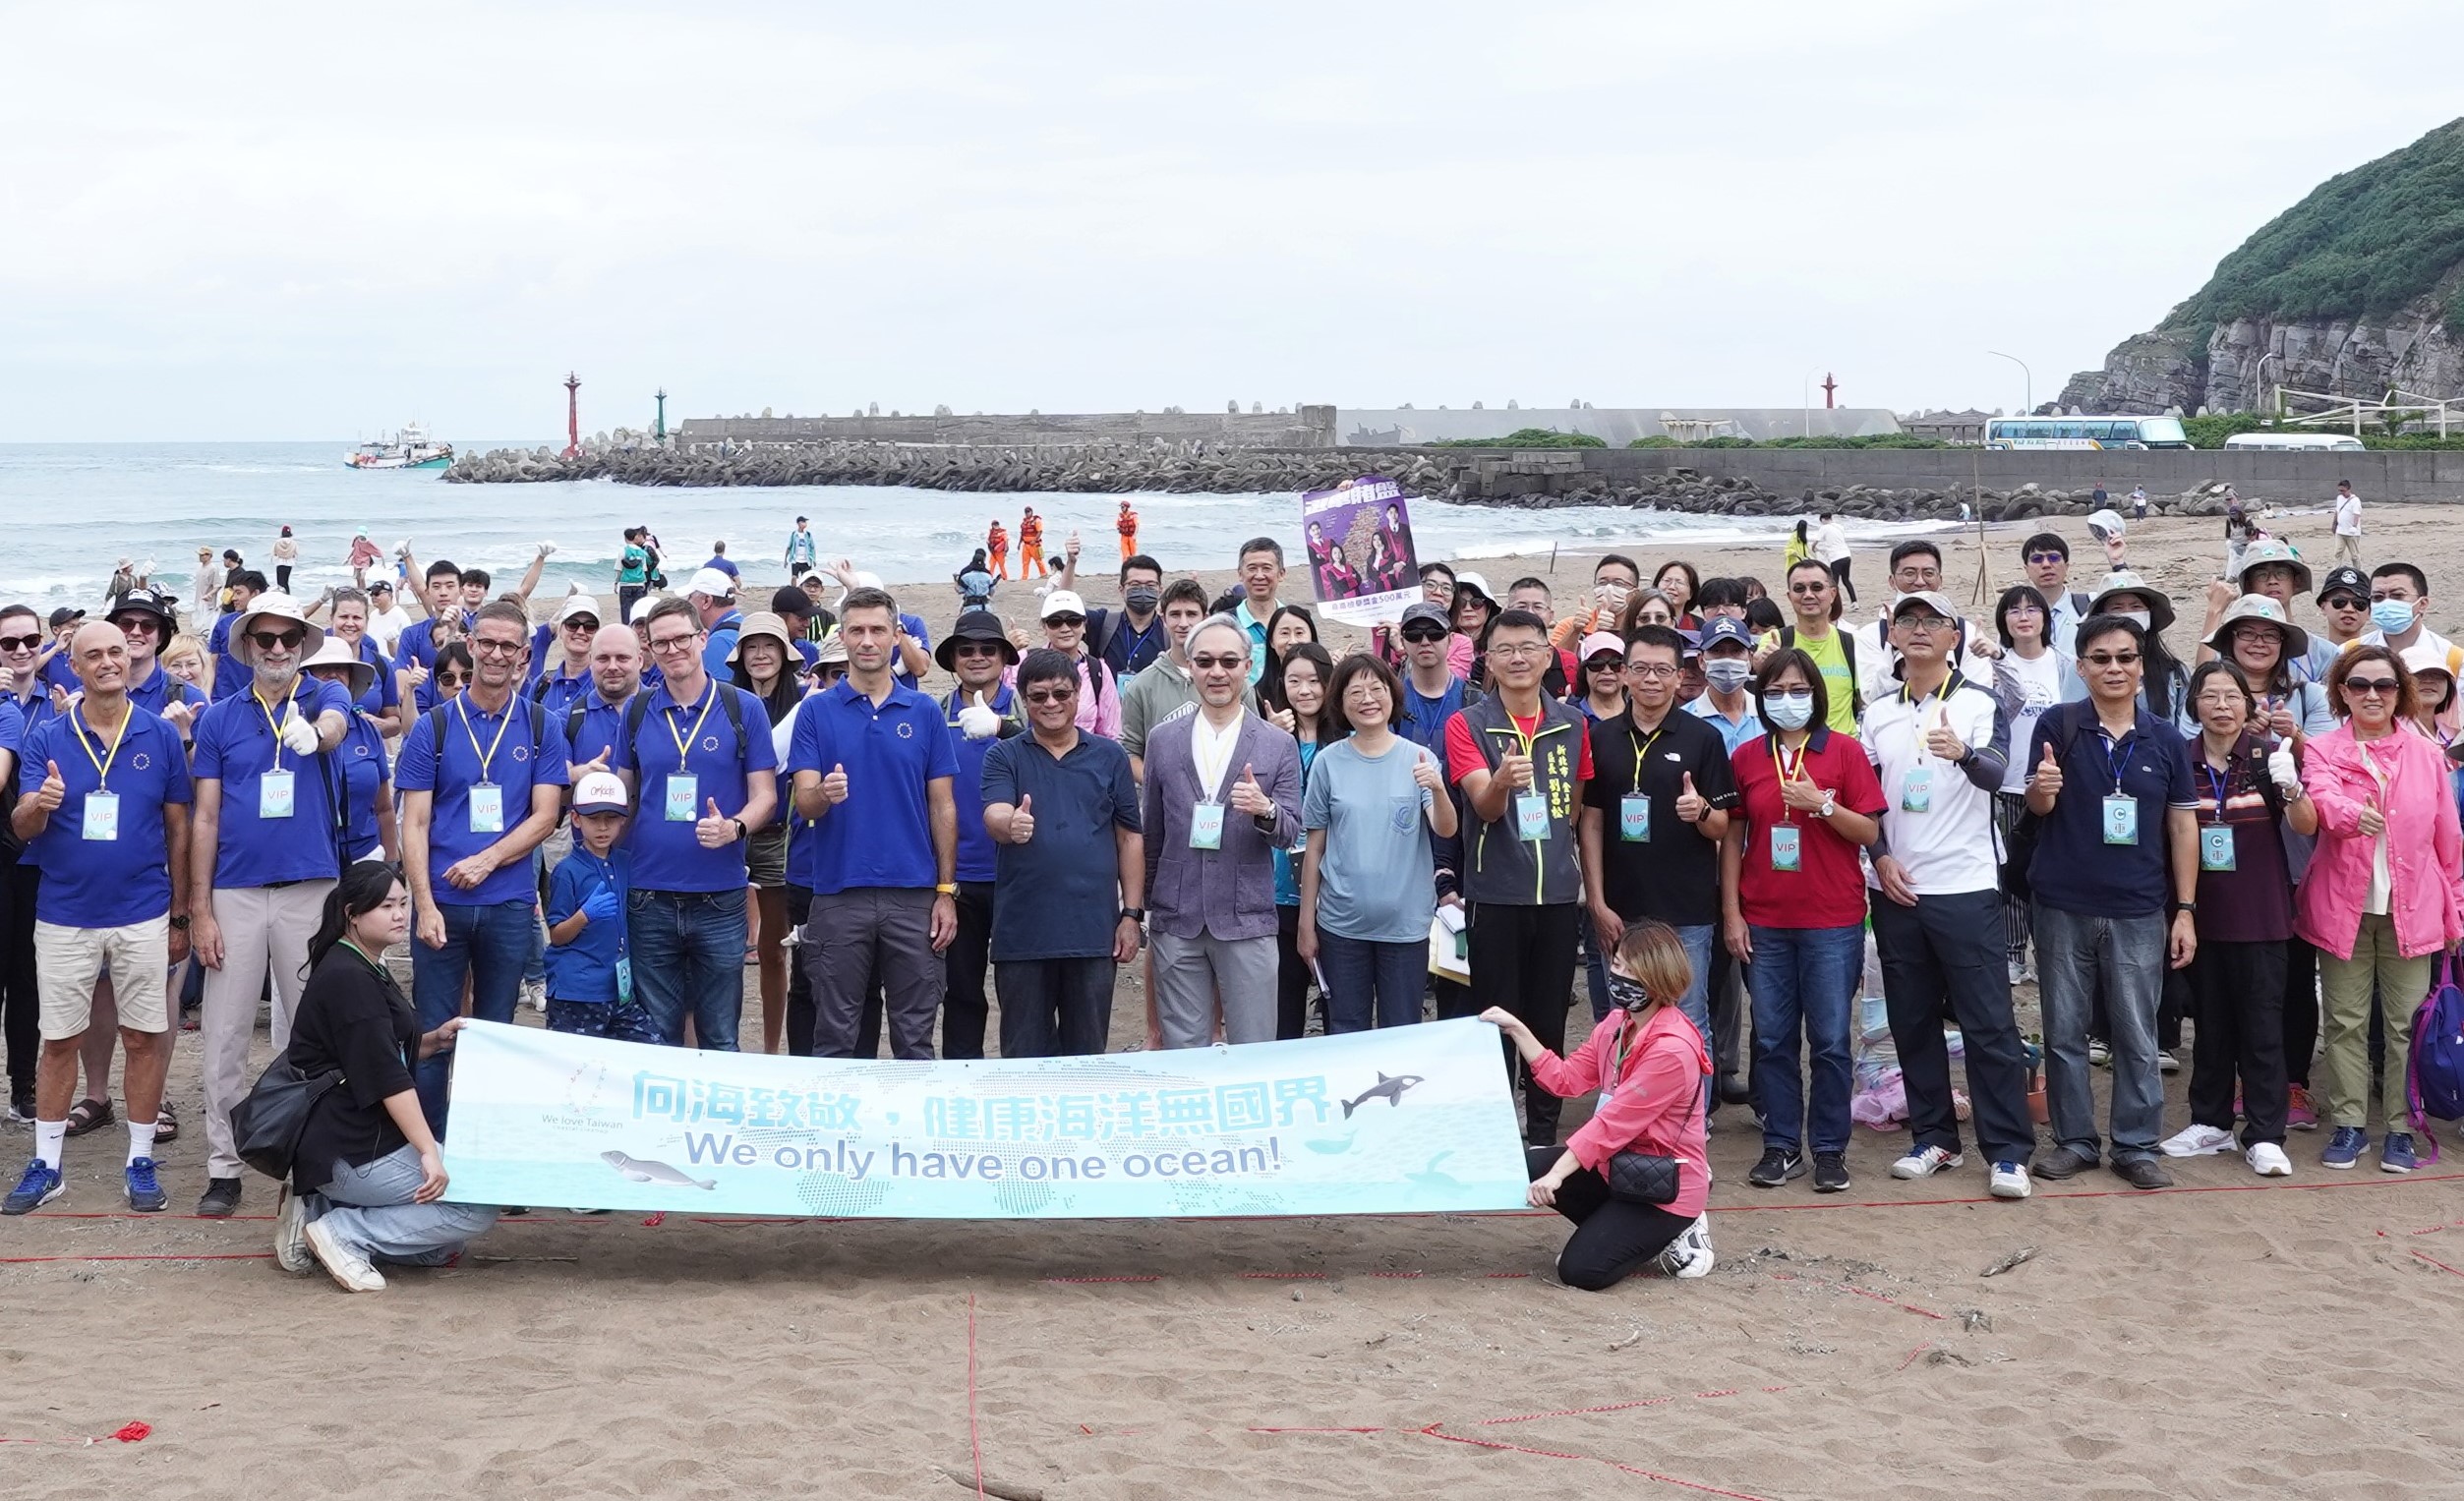 Ministry of Environment, EU representative offices in Taiwan team up for 5th beach cleanup